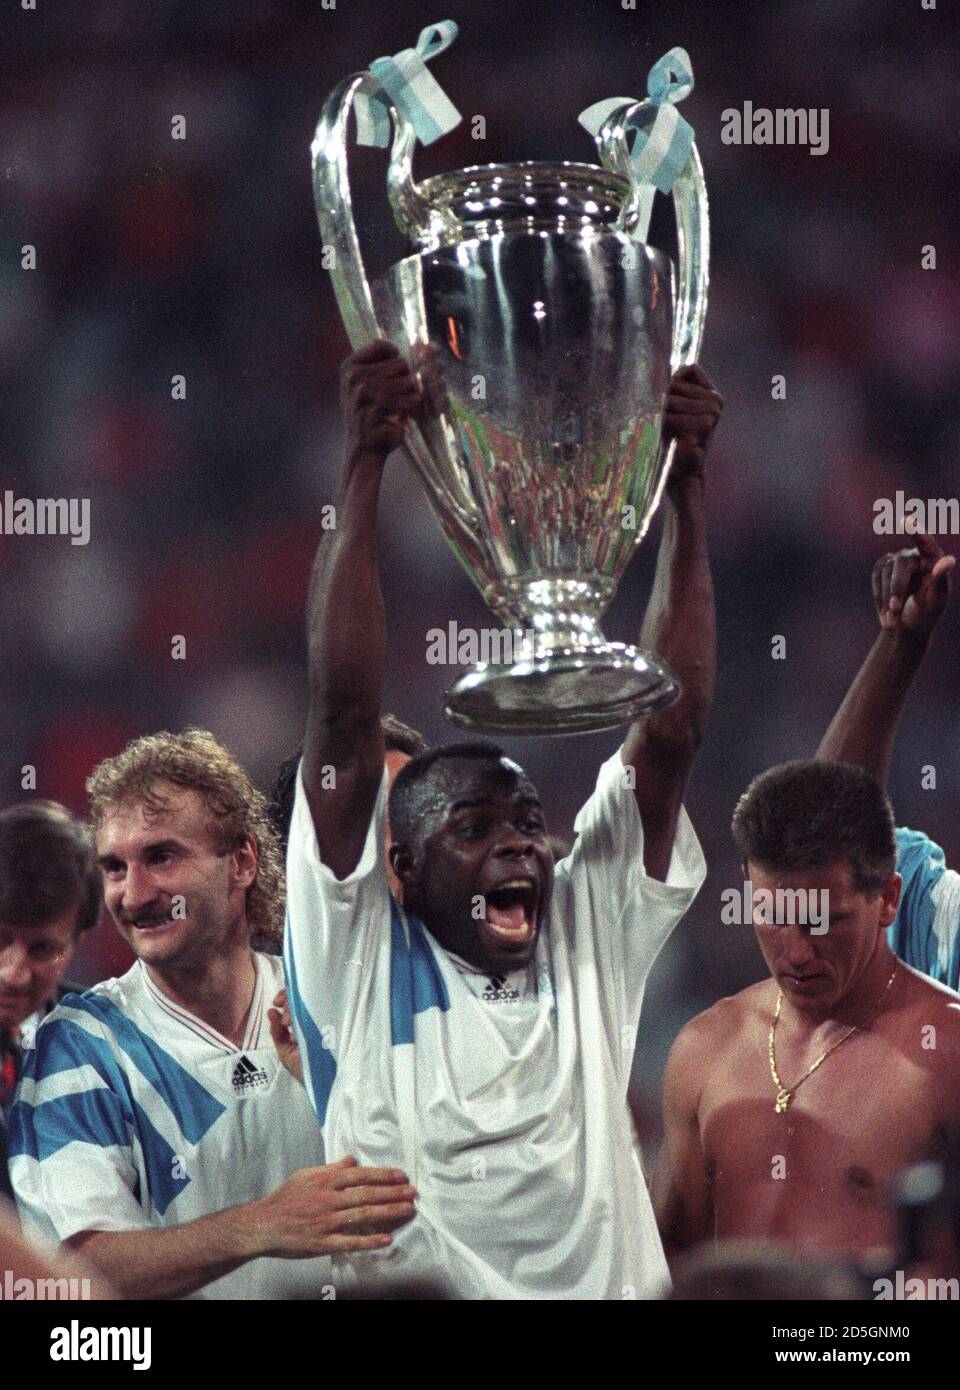 Olympique Marseille's Basile Boli accompanied by teammate Rudi Voeller (L)  displays the European Champions Cup after his team beat AC Milan in the  European Champions Cup final May 26, 1993 with a